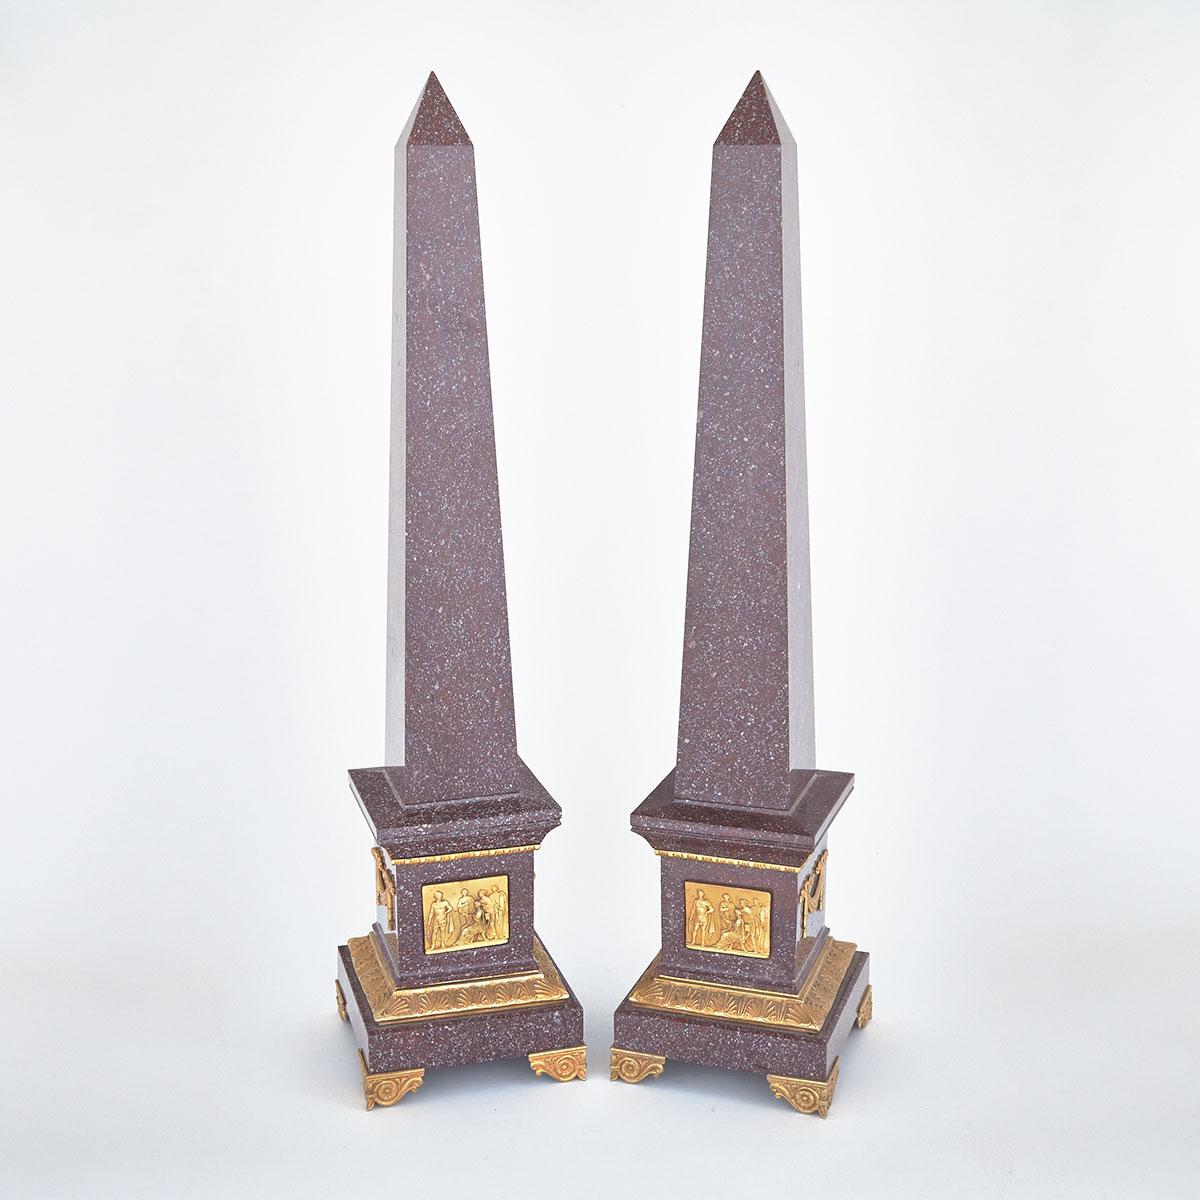 Pair of French Empire Style Ormolu Mounted Red Porphyry Obelisks, mid 20th century